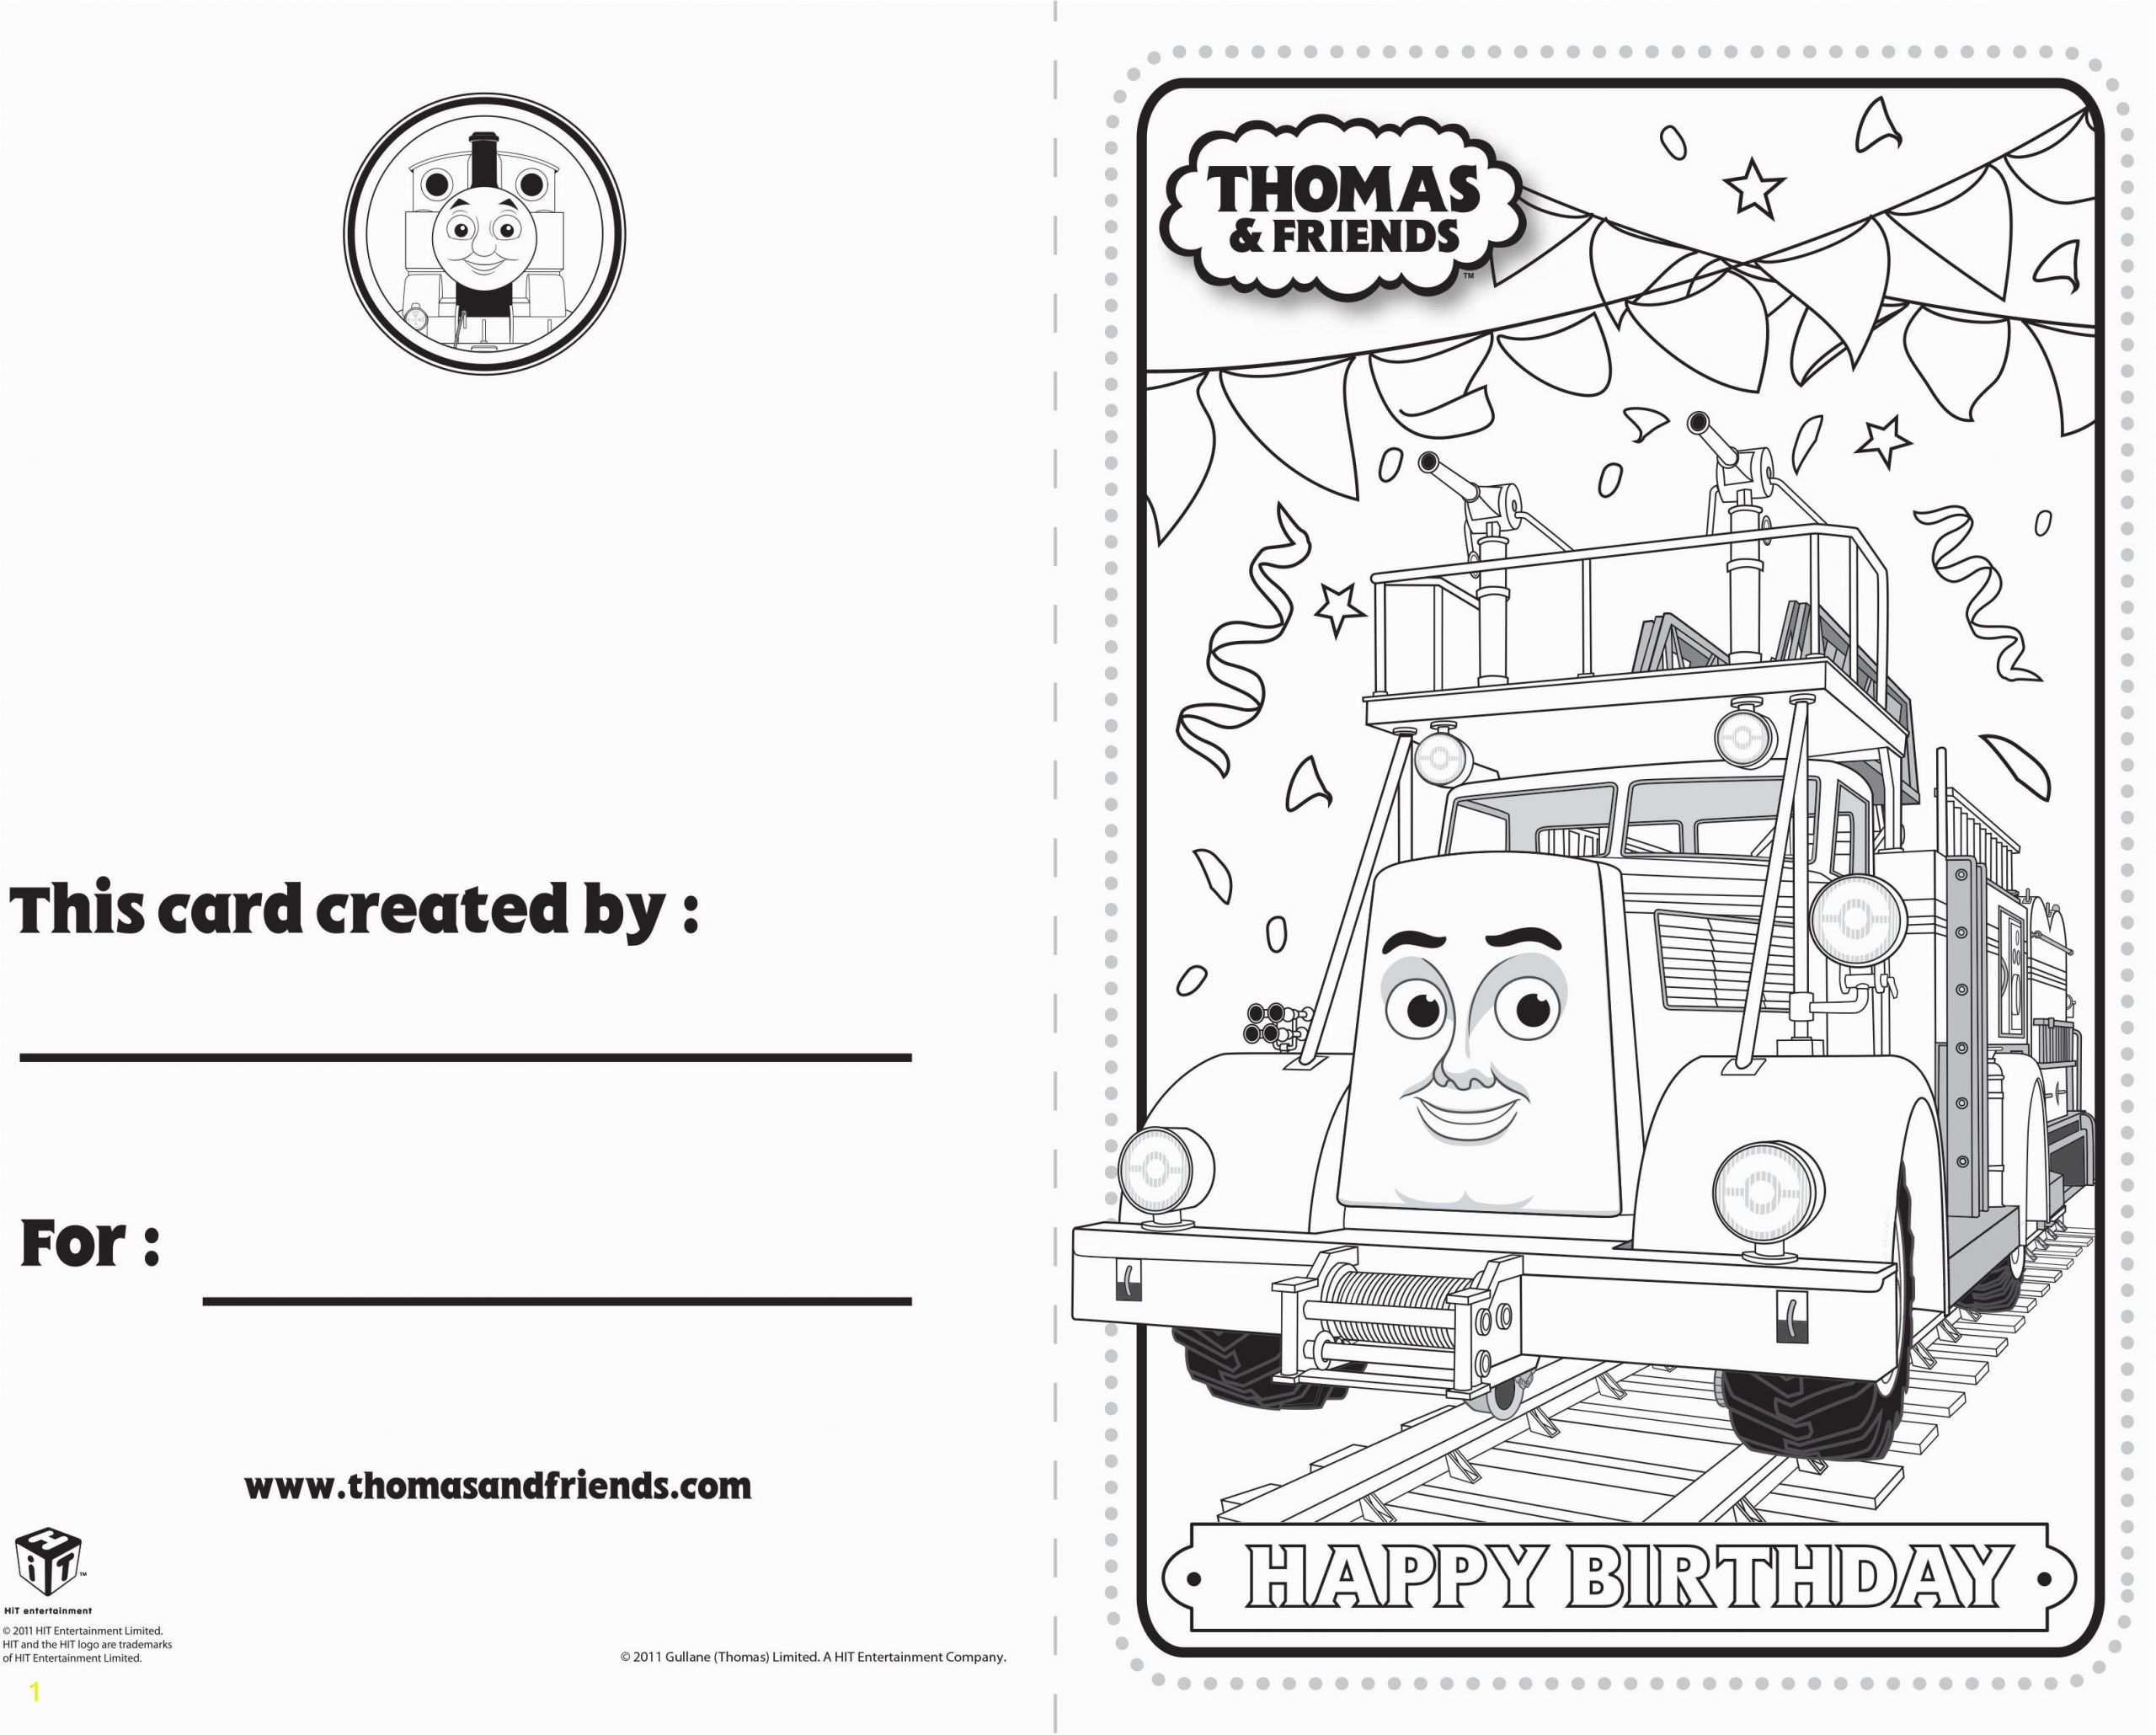 Thomas the Tank Engine Coloring Pages Birthday Thomas and Friends Birthday Card – Flynn Thomasandfriends